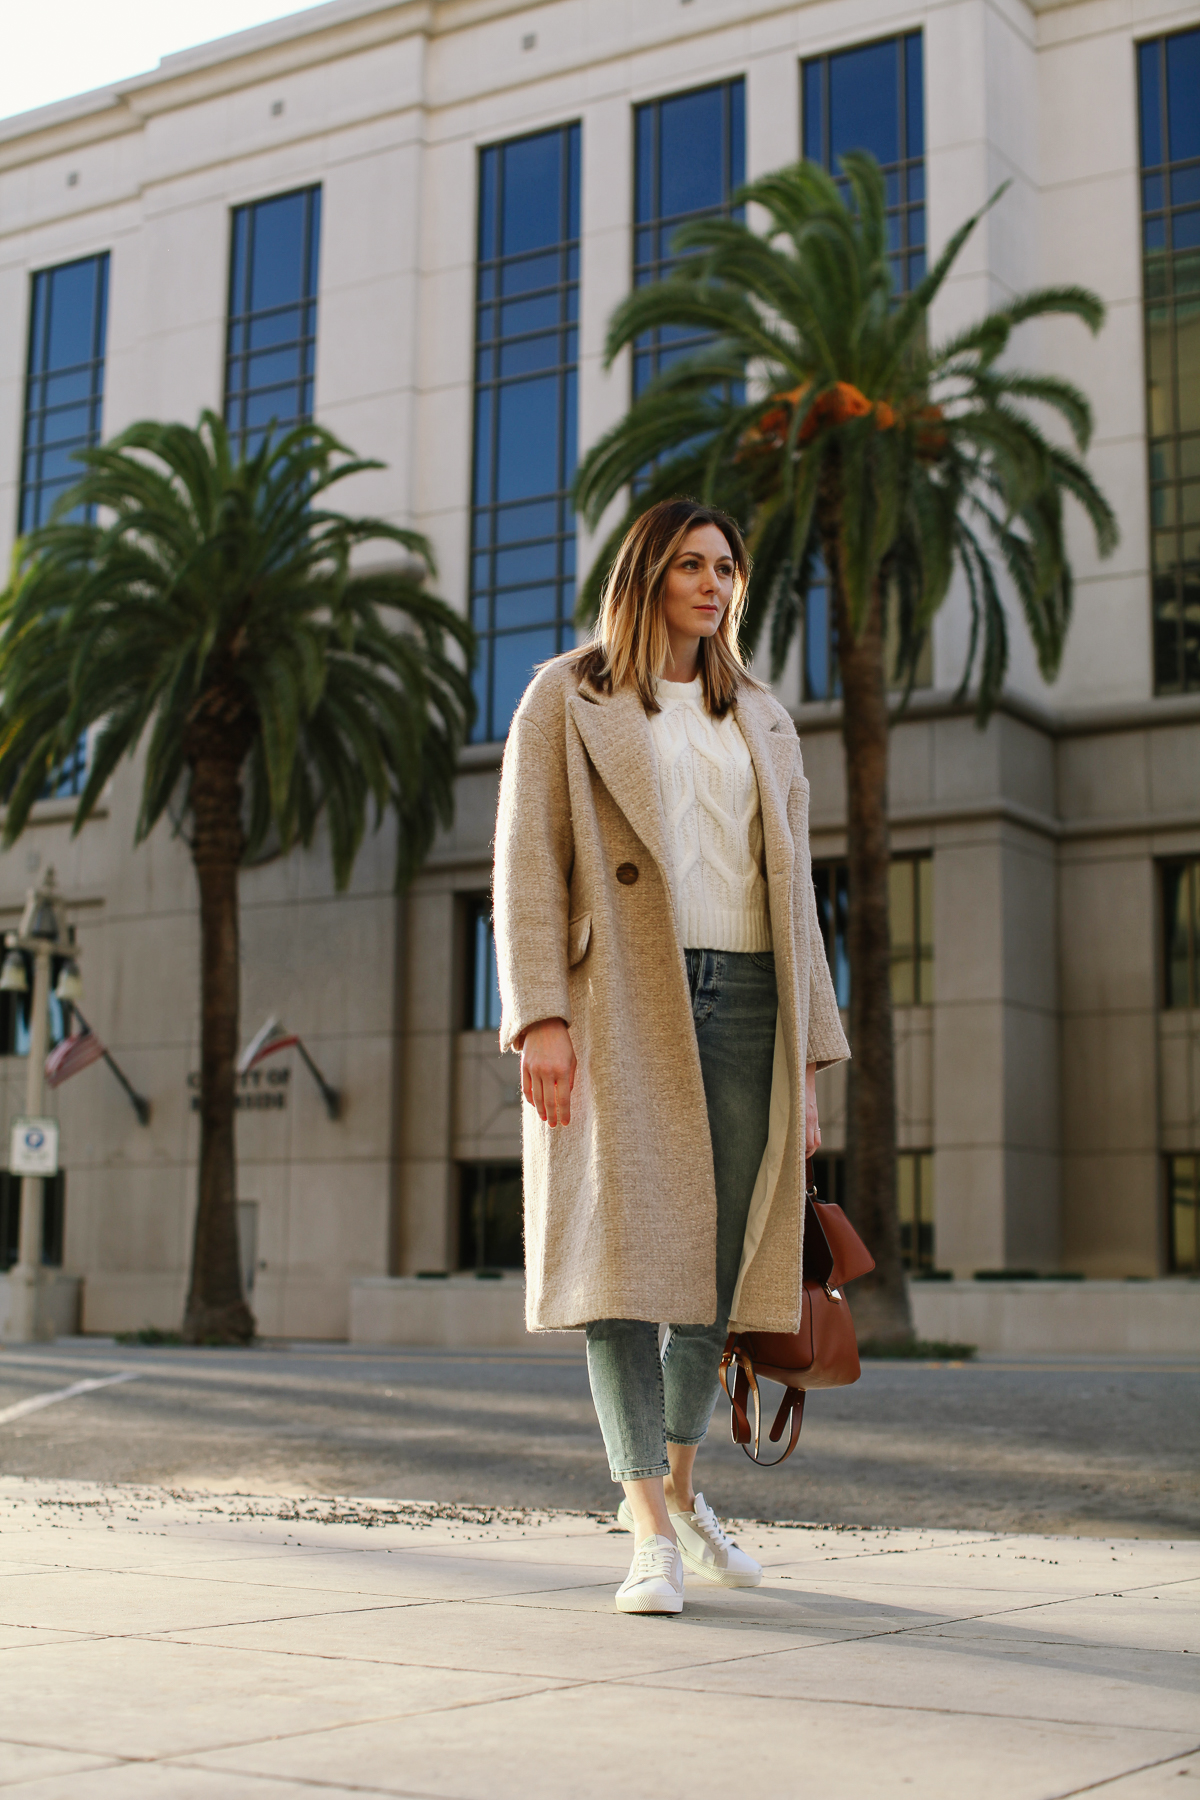 Cute Winter Coats for Women by popular LA fashion blog, Tea Cups and Tulips: image of a woman outside wearing a Zara wool winter coat, H&M Cable-knit Sweater, H&M Mom High Ankle Jeans, and Caiuma White /Ice Leather sneakers.